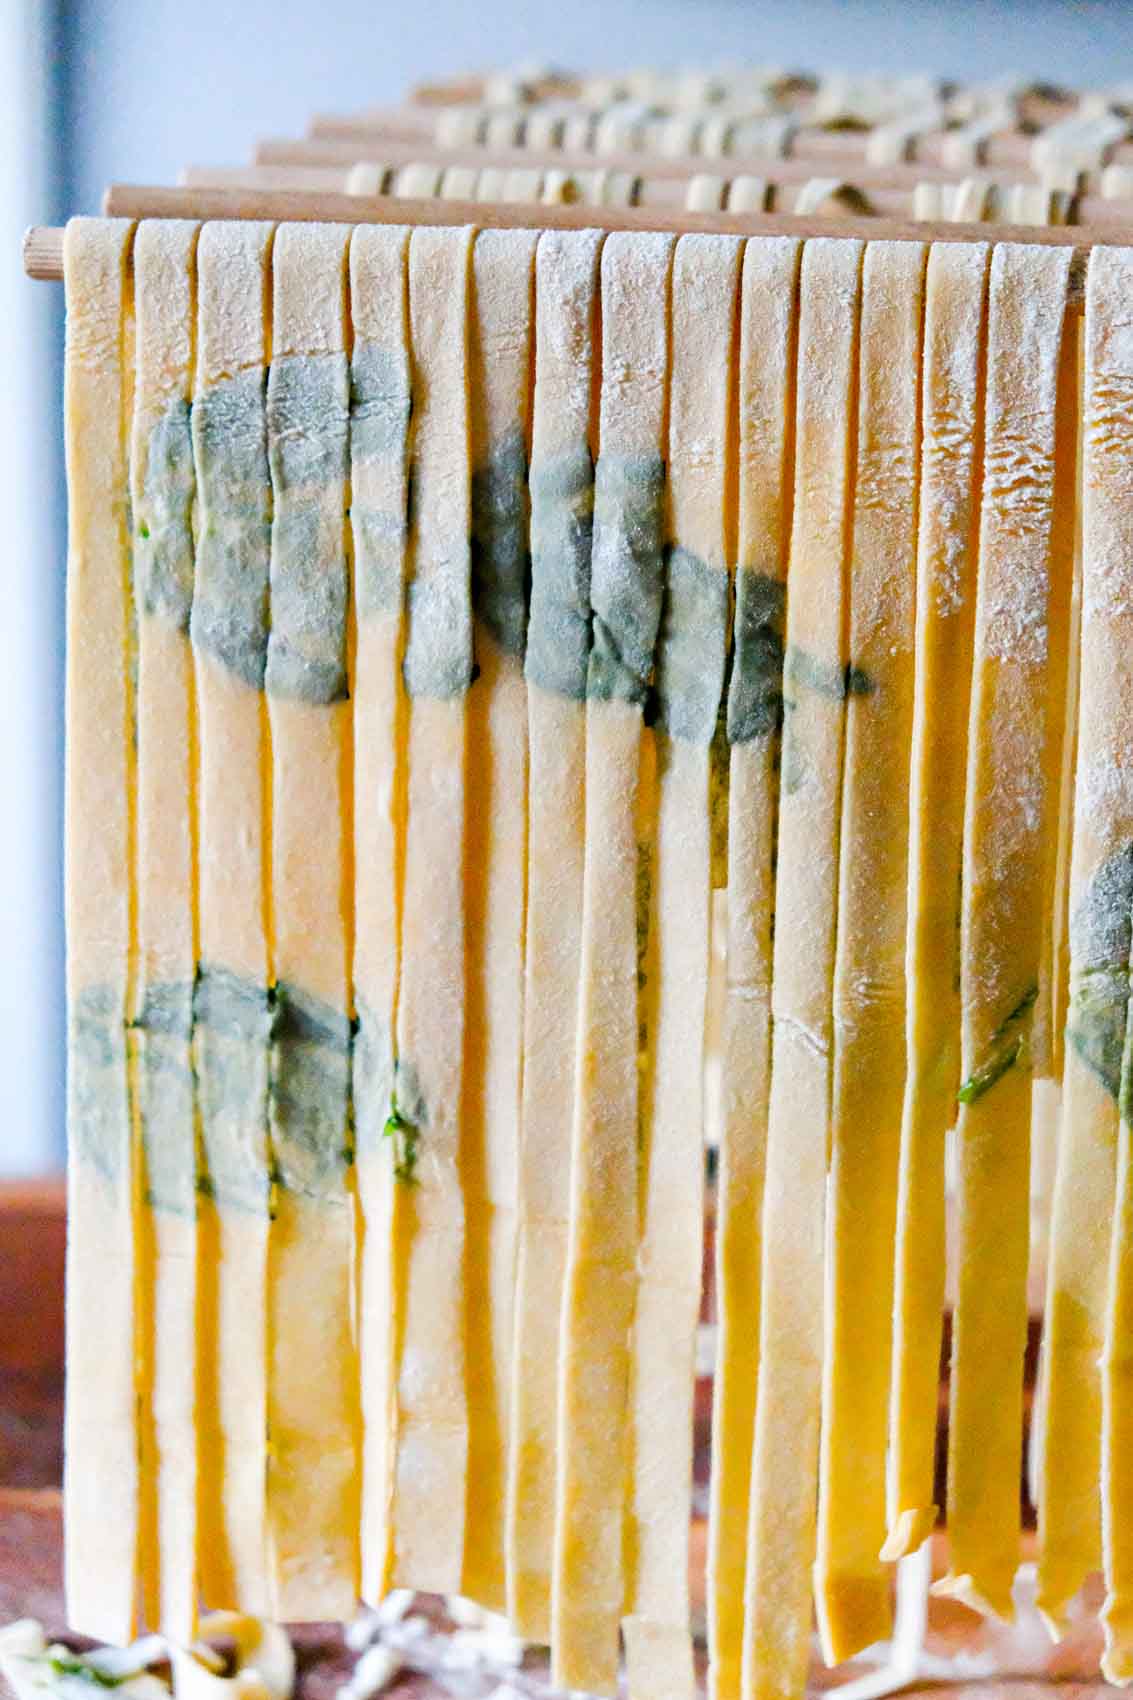 laminated tagliatelle with basil leaves in the pasta dough